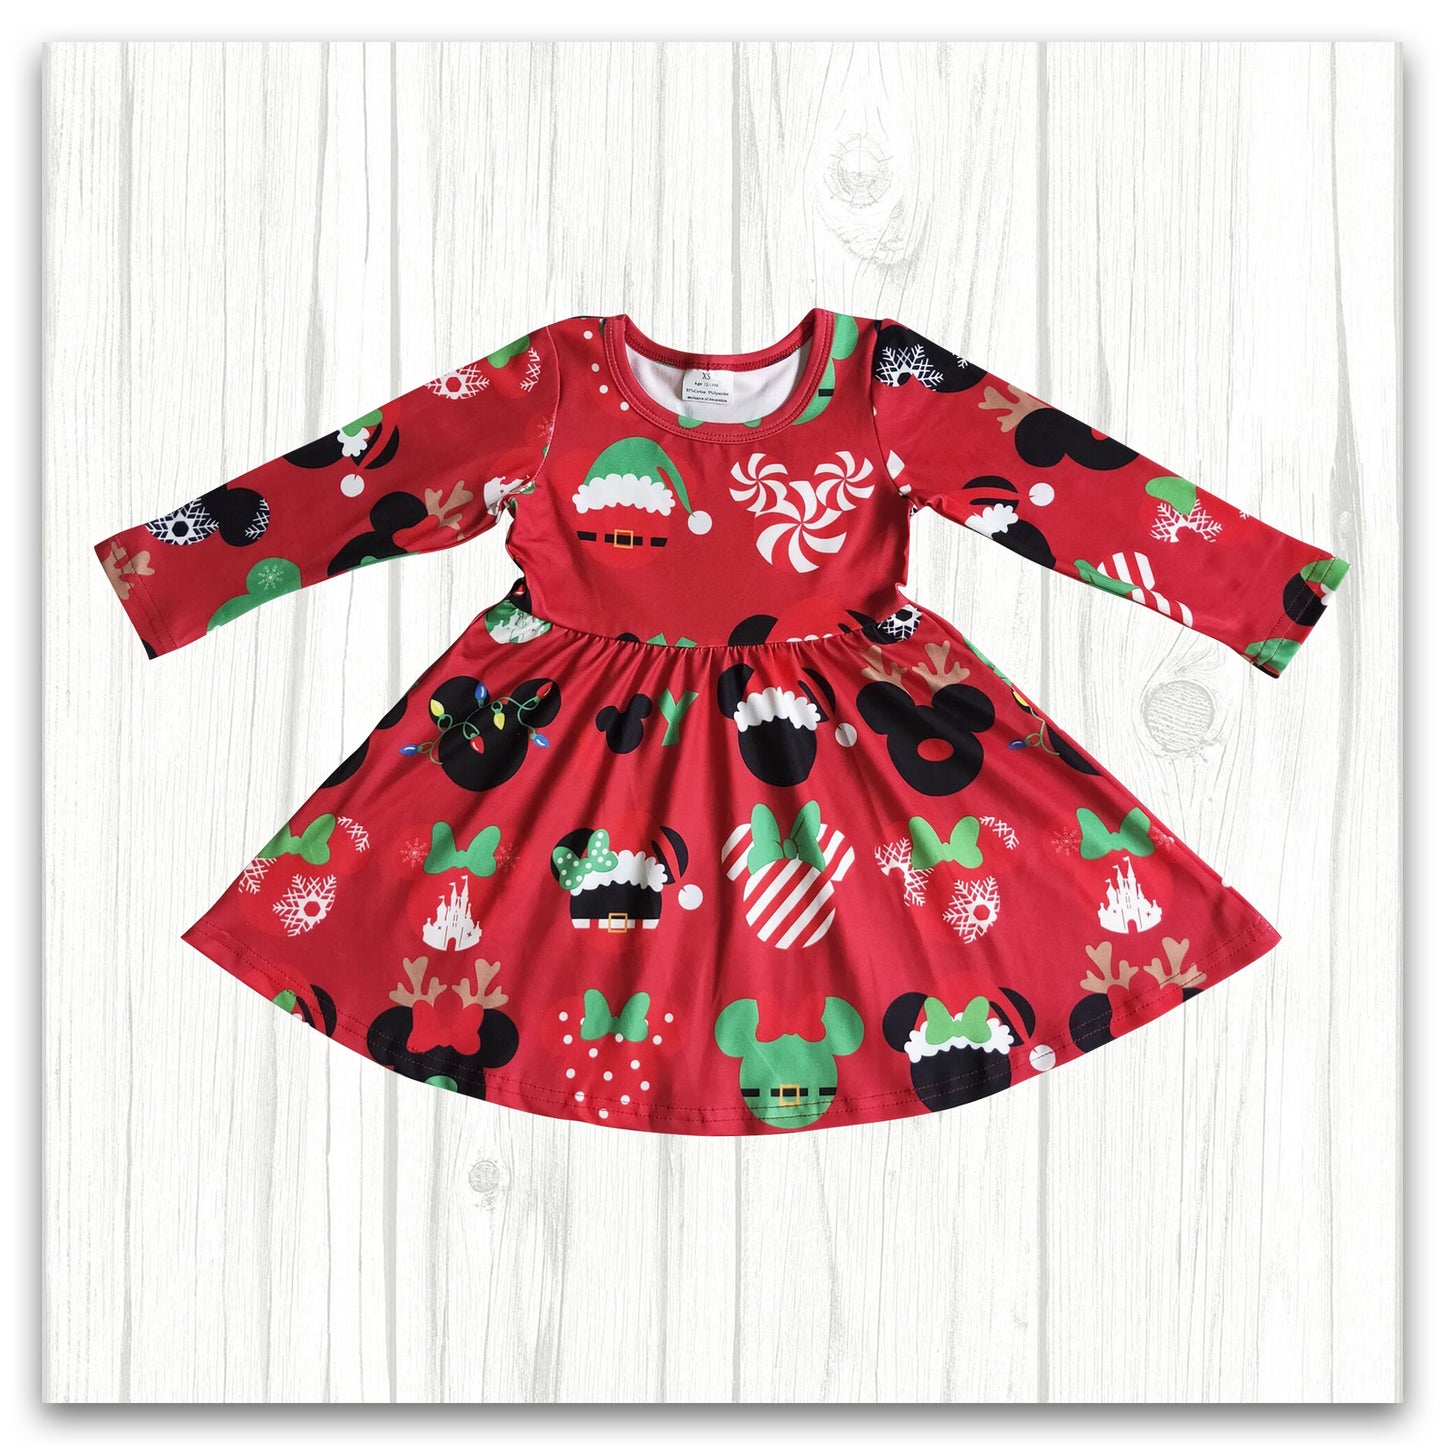 Red Long Sleeve Twirl Dress Girl Christmas Clothes